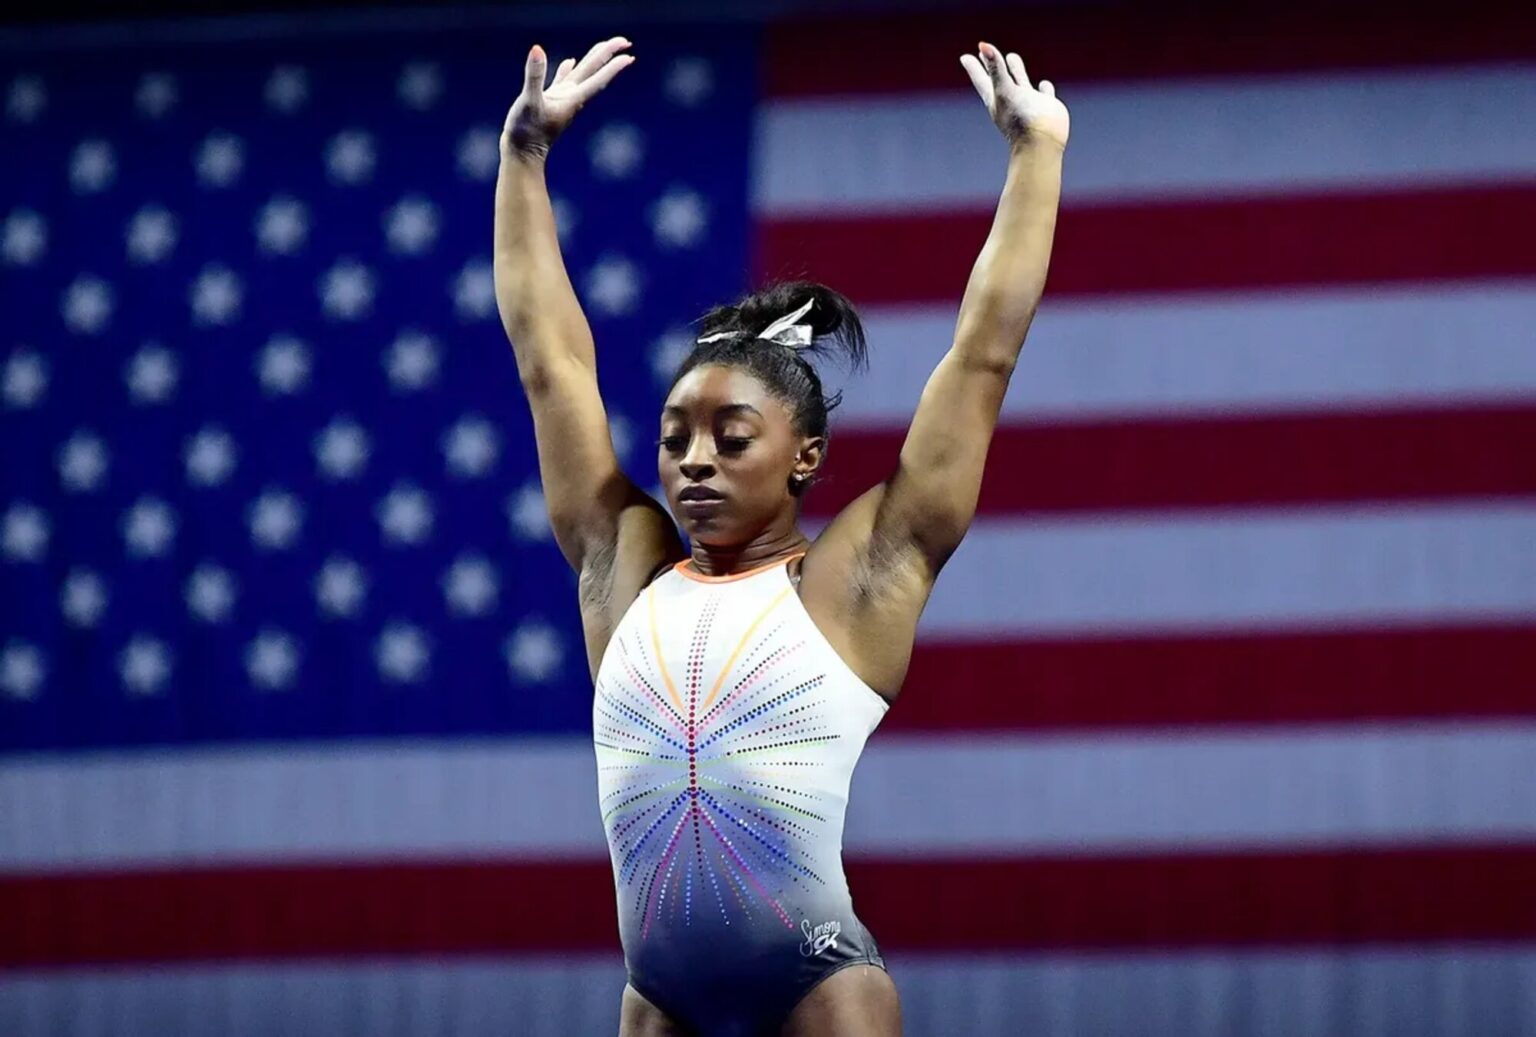 Finally, the group of U.S. gymnasts have been selected to compete at the 2020 Olympics in Tokyo. Meet the team of talented gymnasts.